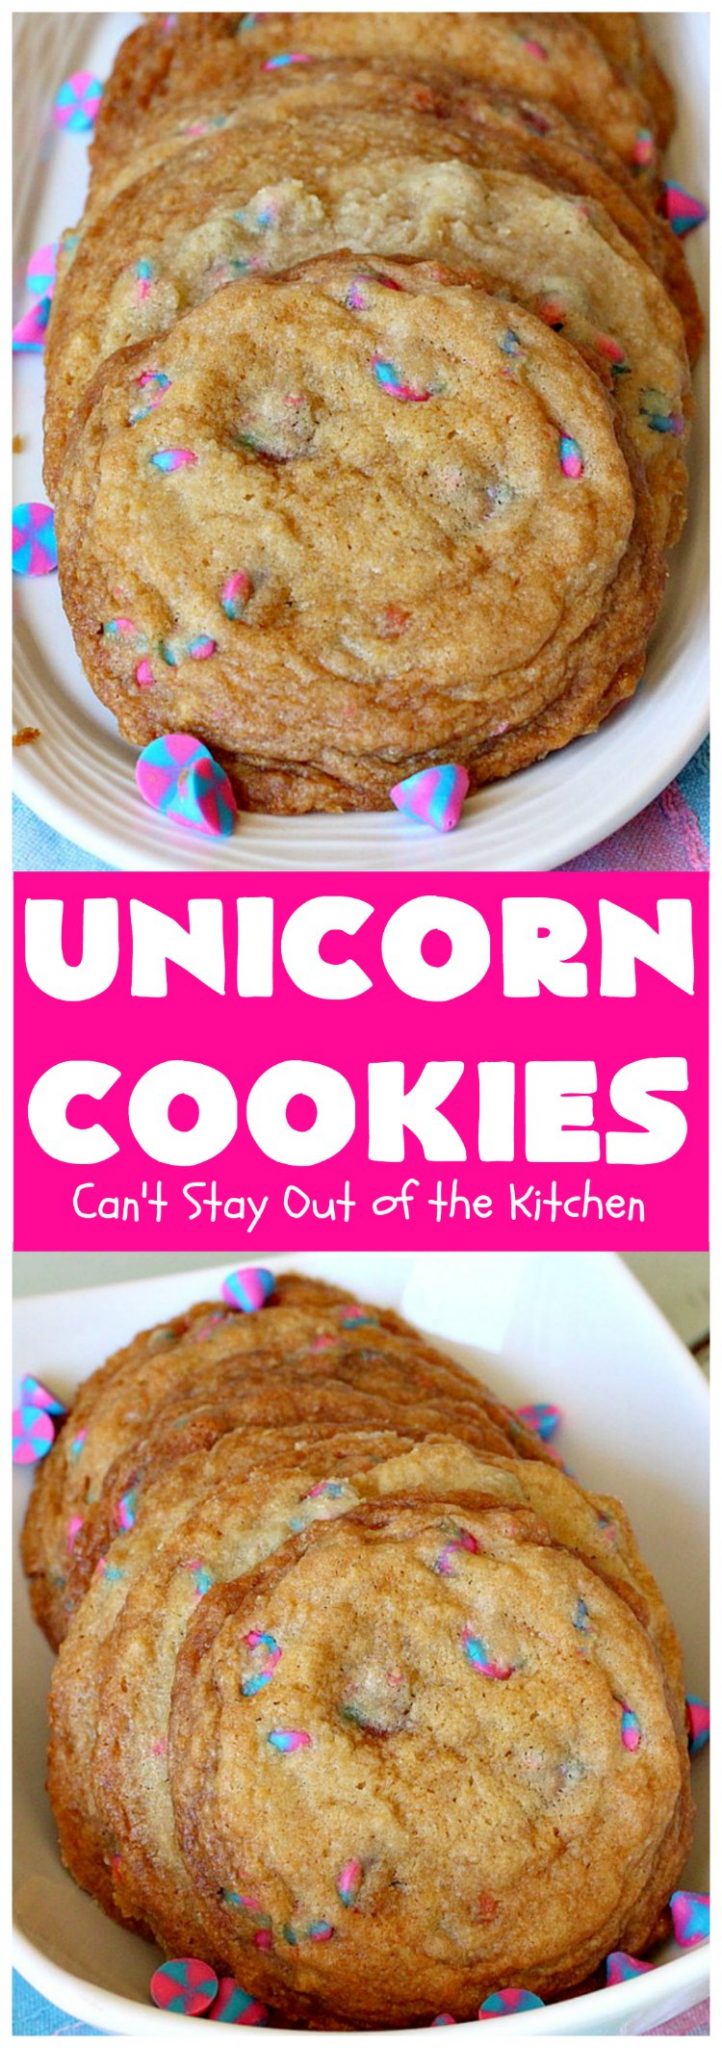 Unicorn Cookies – Can't Stay Out of the Kitchen